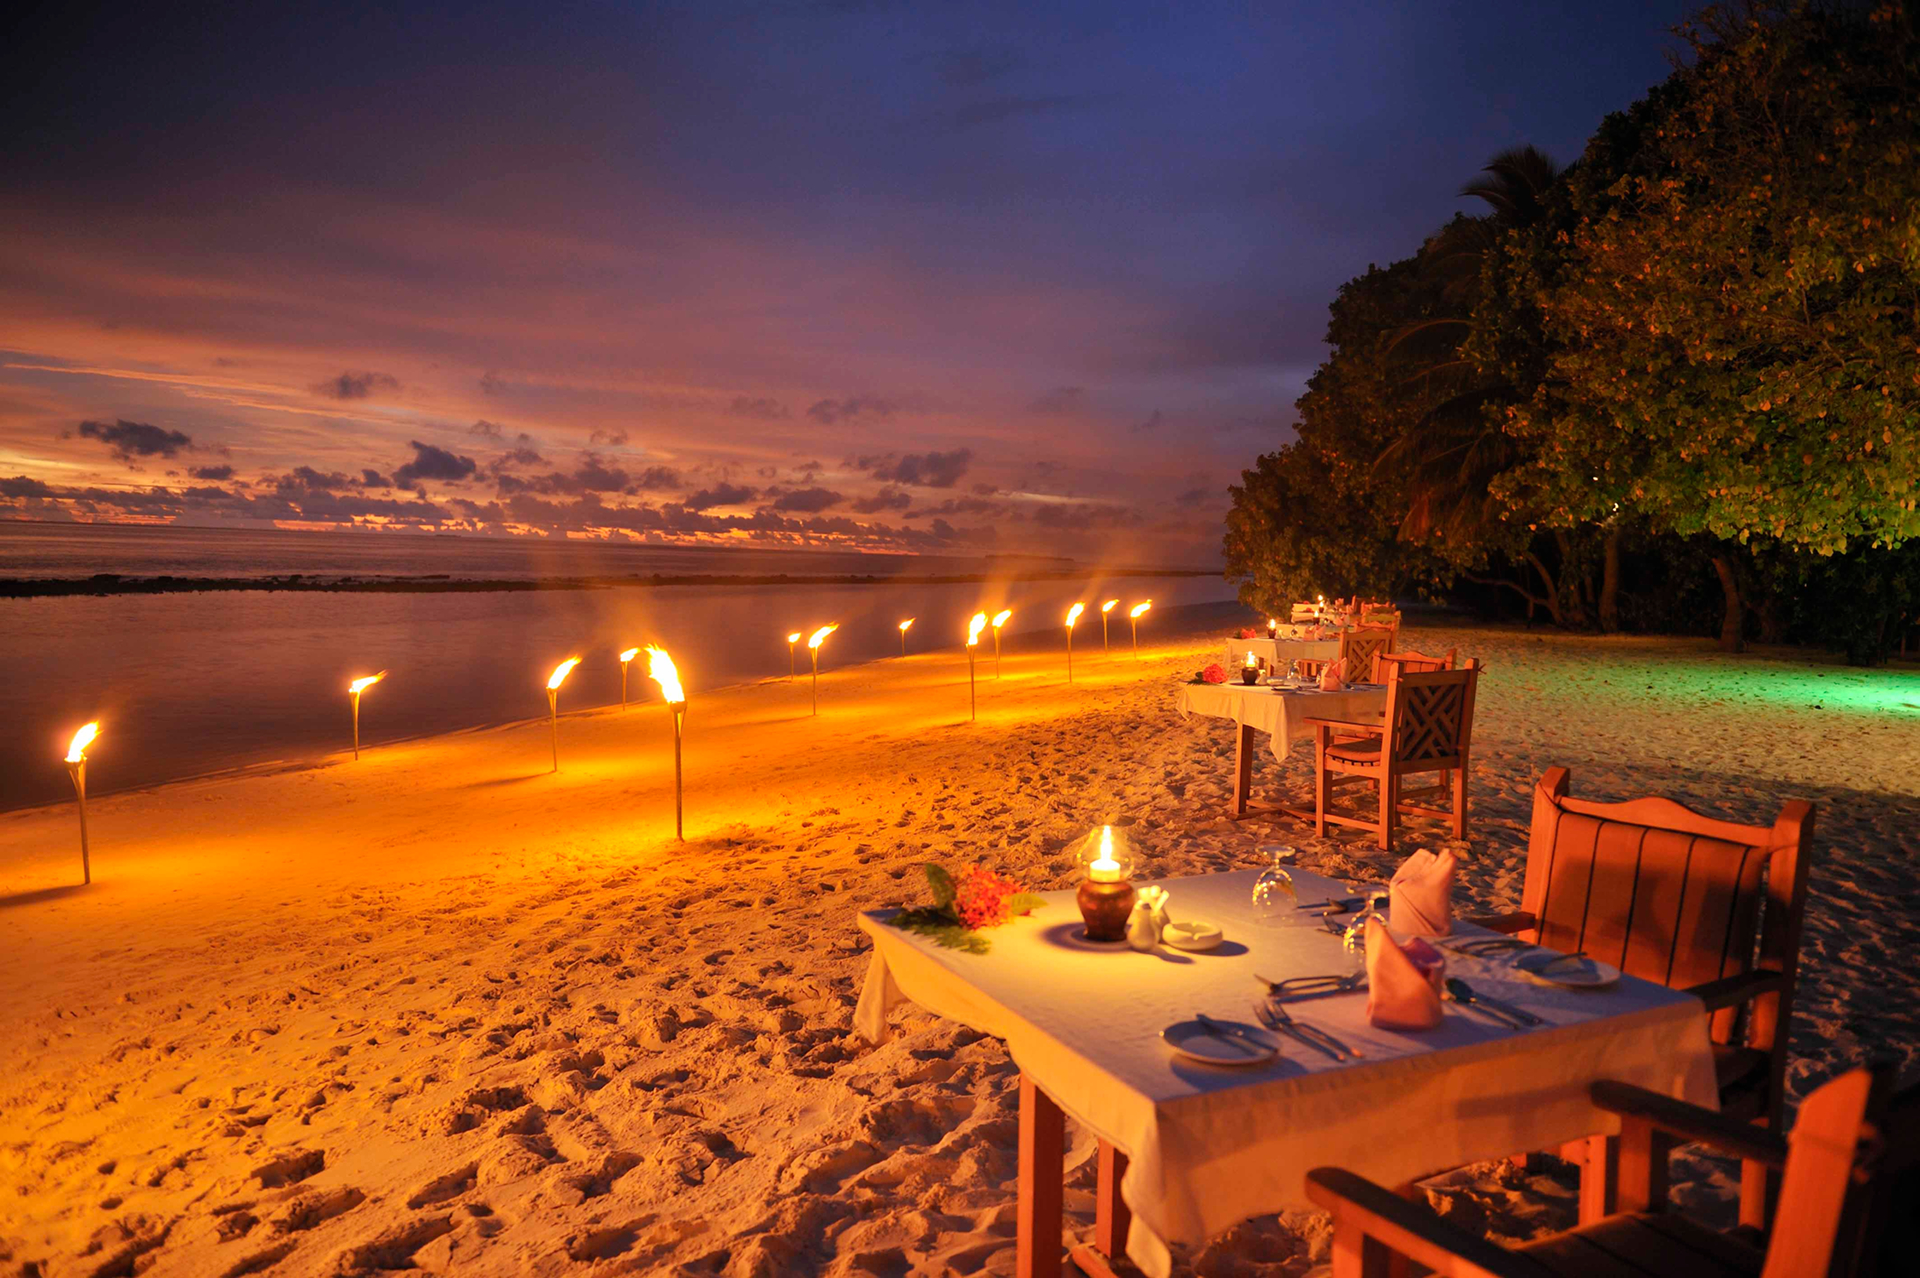 Dining On The Beach At Night In The Maldives Ocean Wallpaper Hd Holidays 4k Wallpapers Images Photos And Background